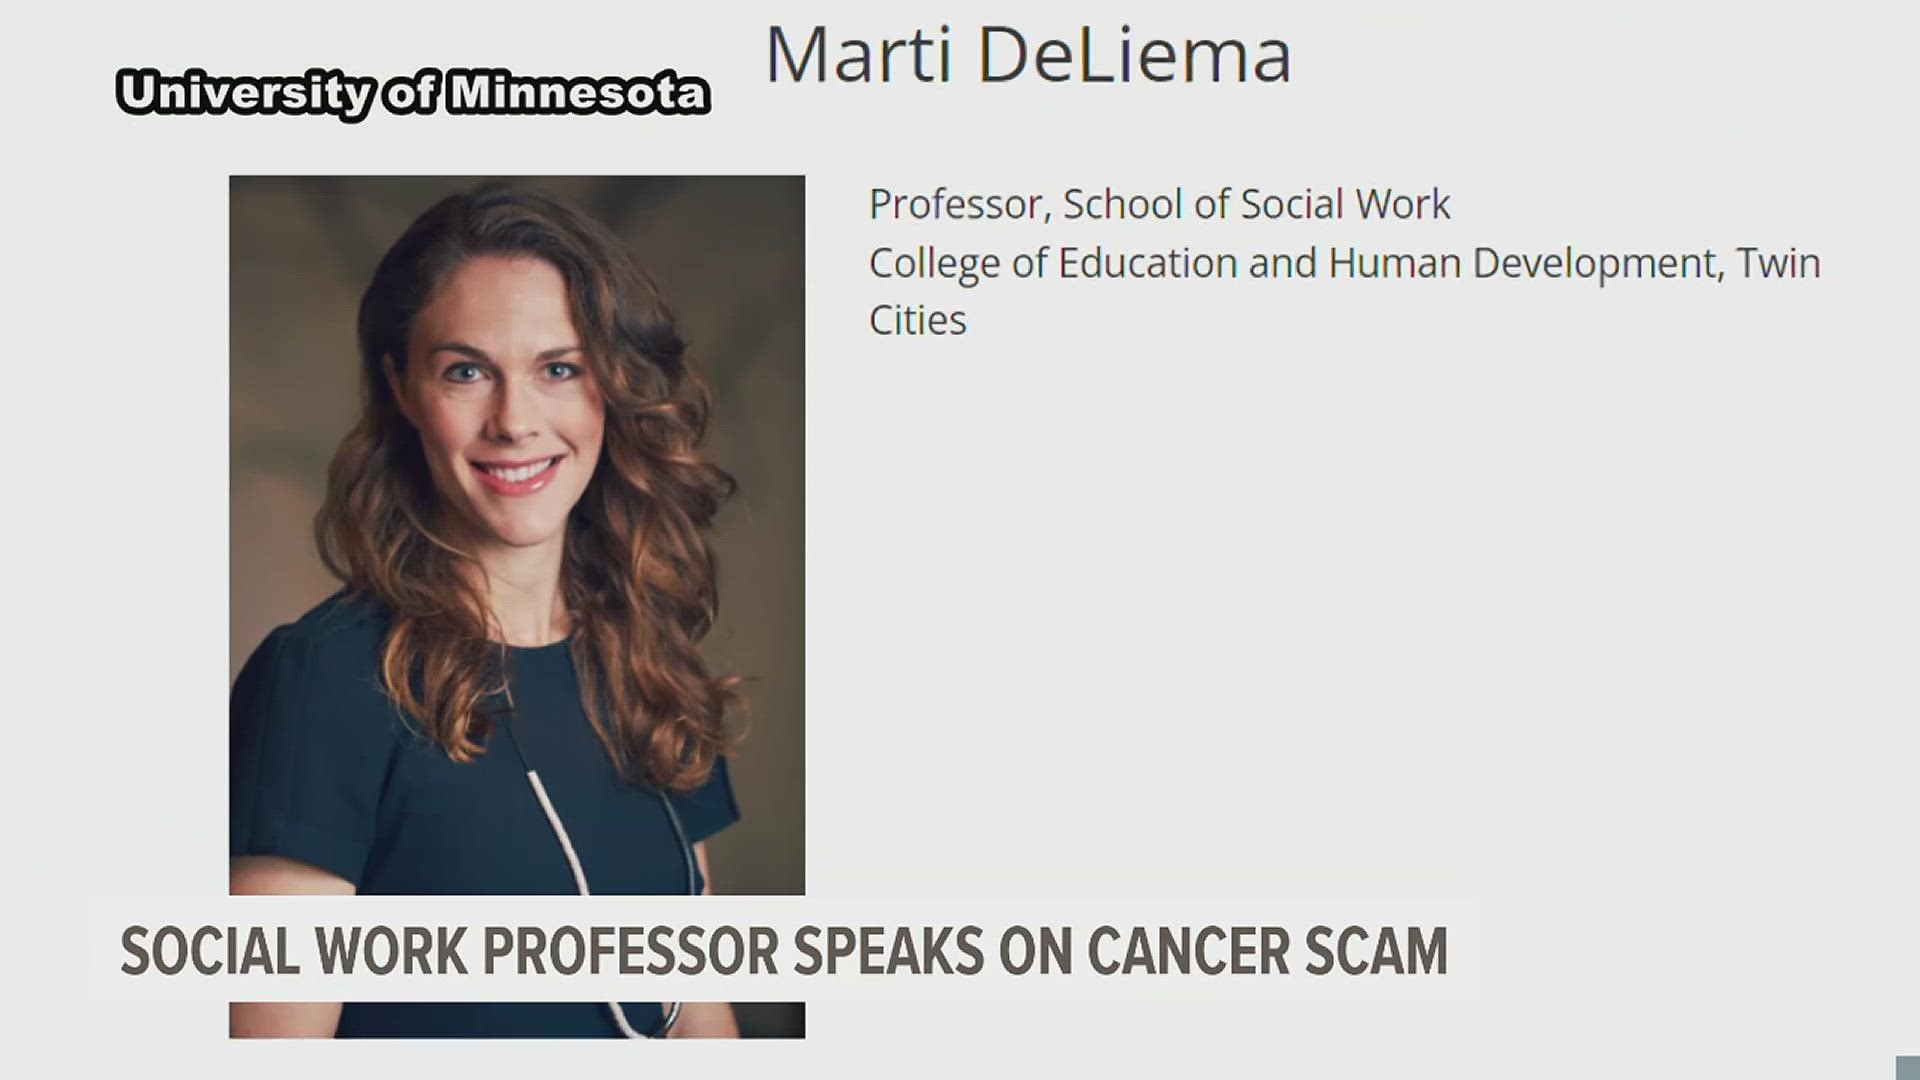 Dr. Marti DeLiema spoke with News 8 about Maddie Russo and what the motivation behind the alleged scam may have been.